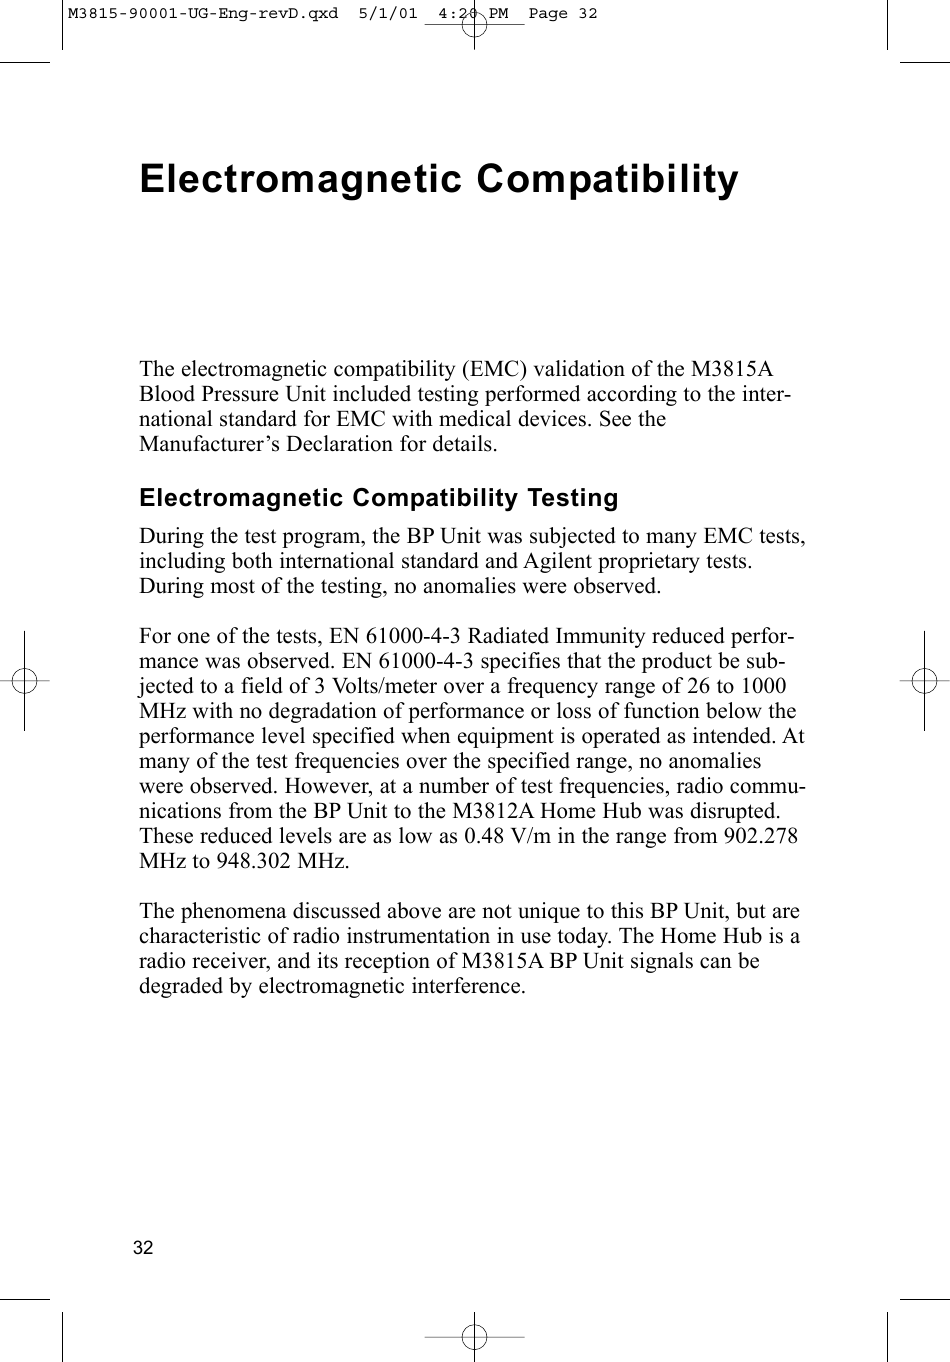 32Electromagnetic CompatibilityThe electromagnetic compatibility (EMC) validation of the M3815ABlood Pressure Unit included testing performed according to the inter-national standard for EMC with medical devices. See theManufacturer’s Declaration for details.Electromagnetic Compatibility TestingDuring the test program, the BP Unit was subjected to many EMC tests,including both international standard and Agilent proprietary tests.During most of the testing, no anomalies were observed. For one of the tests, EN 61000-4-3 Radiated Immunity reduced perfor-mance was observed. EN 61000-4-3 specifies that the product be sub-jected to a field of 3 Volts/meter over a frequency range of 26 to 1000MHz with no degradation of performance or loss of function below theperformance level specified when equipment is operated as intended. Atmany of the test frequencies over the specified range, no anomalieswere observed. However, at a number of test frequencies, radio commu-nications from the BP Unit to the M3812A Home Hub was disrupted.These reduced levels are as low as 0.48 V/m in the range from 902.278MHz to 948.302 MHz.The phenomena discussed above are not unique to this BP Unit, but arecharacteristic of radio instrumentation in use today. The Home Hub is aradio receiver, and its reception of M3815A BP Unit signals can bedegraded by electromagnetic interference. M3815-90001-UG-Eng-revD.qxd  5/1/01  4:20 PM  Page 32